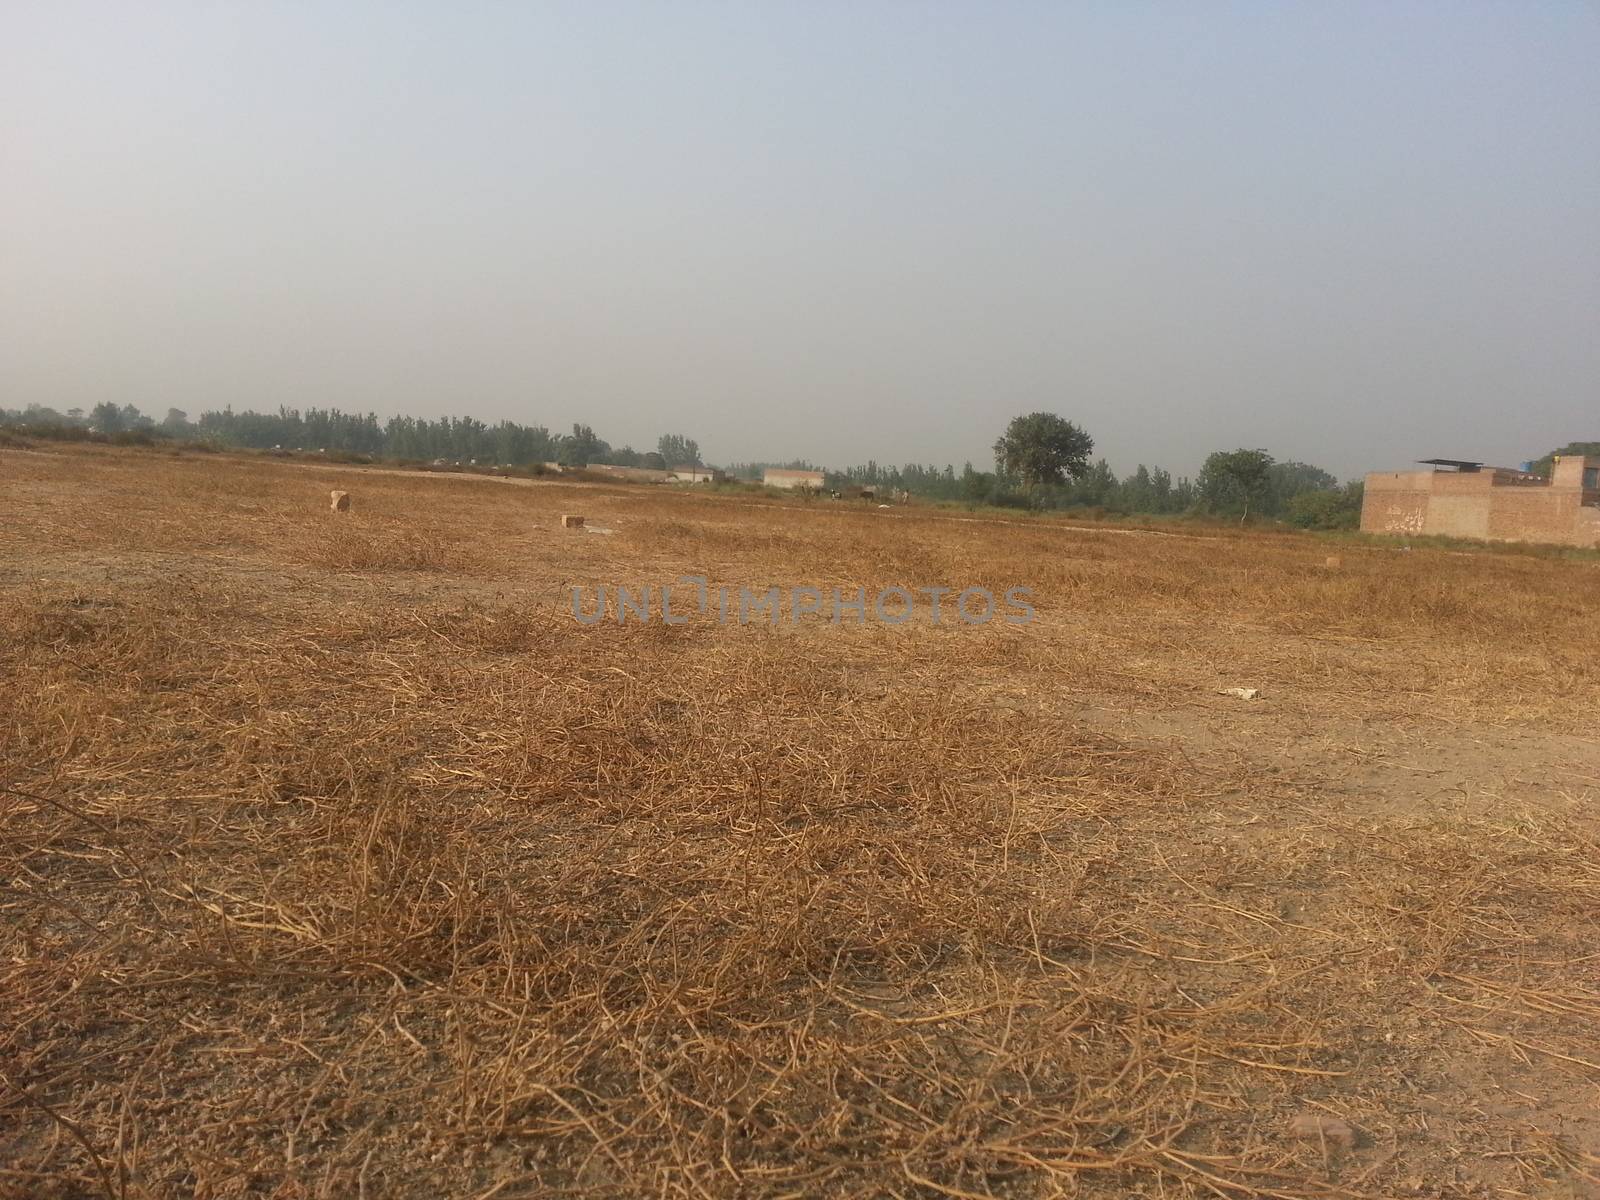 Arid brown grassland view of a rural land in hot weather on sunny day under blue sky